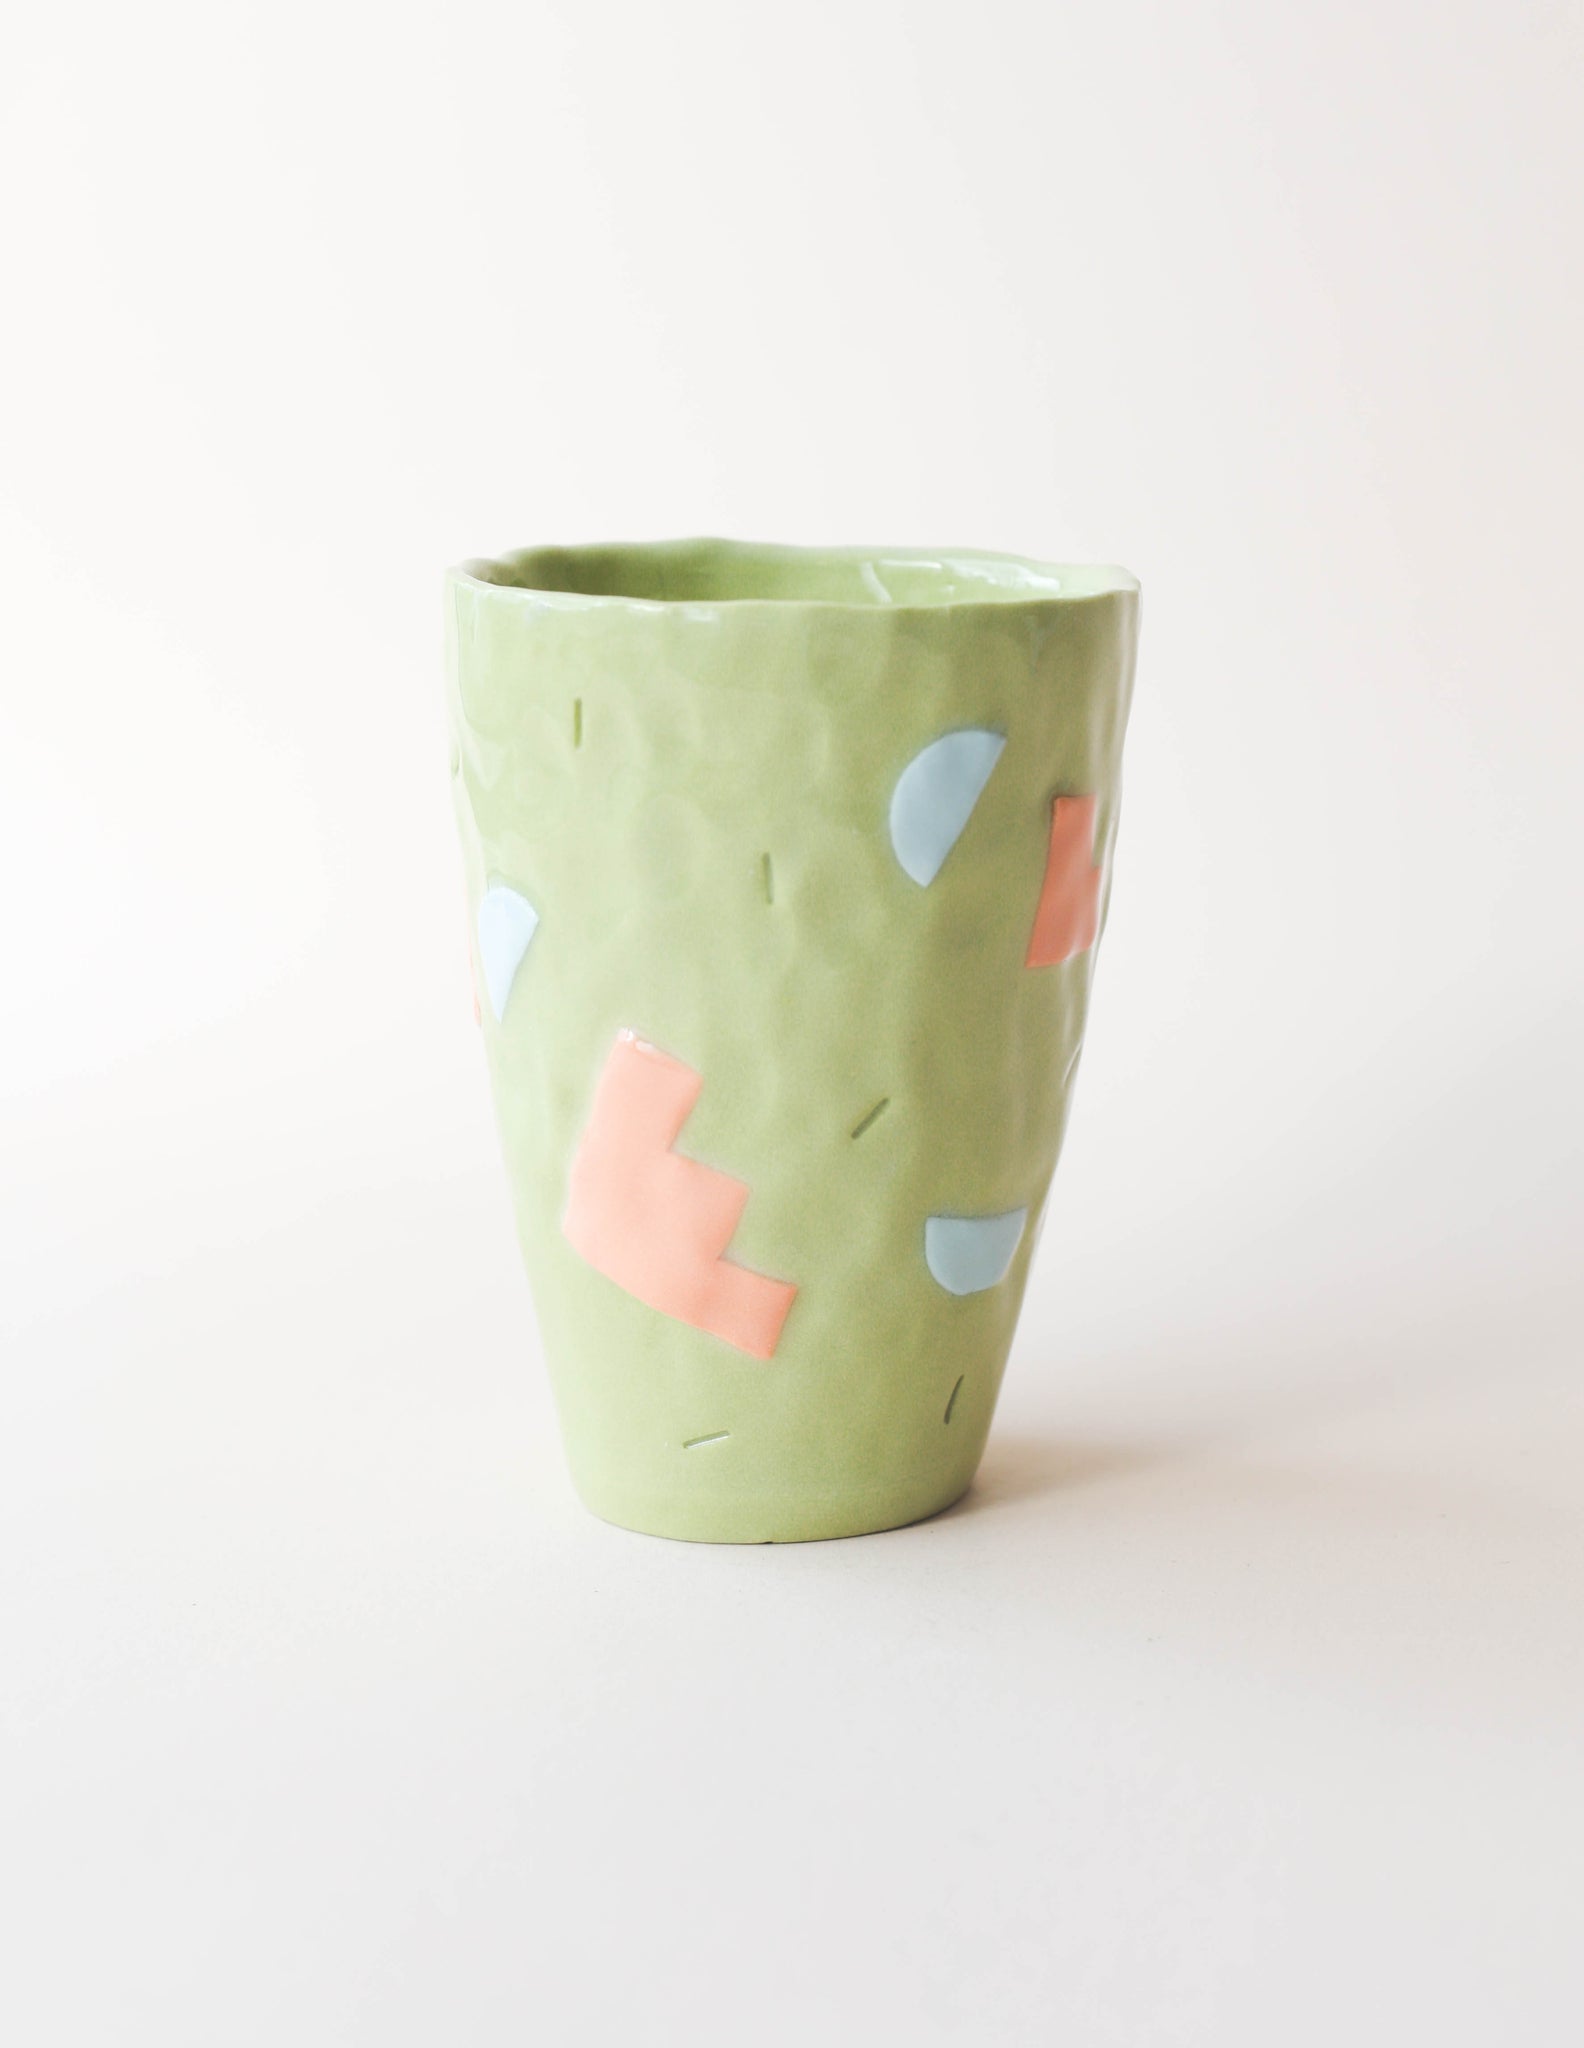 Lil Green 90s Cup